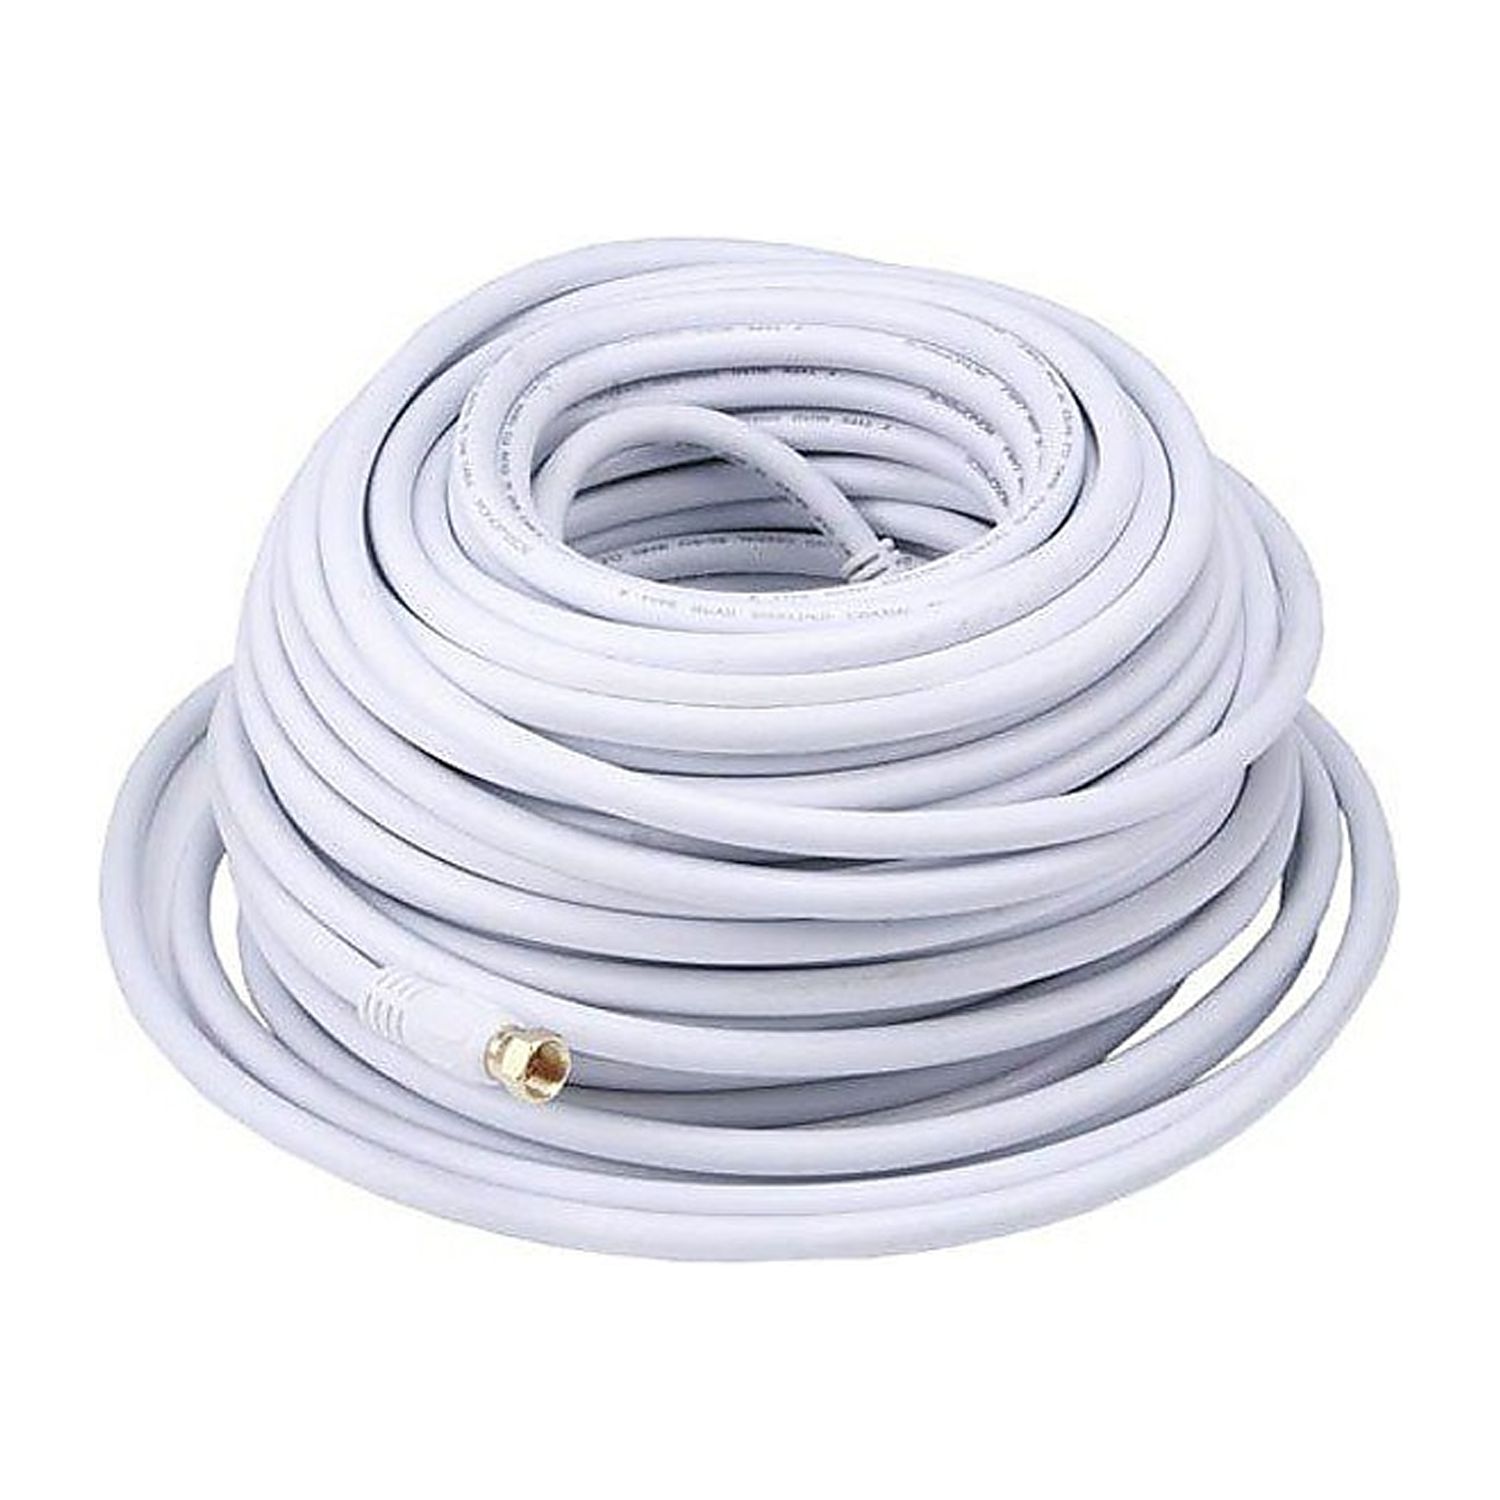 Monoprice 100' CL2 Quad Shielded RG6 F Type 18AWG Coaxial Cable White 104062 - image 1 of 3